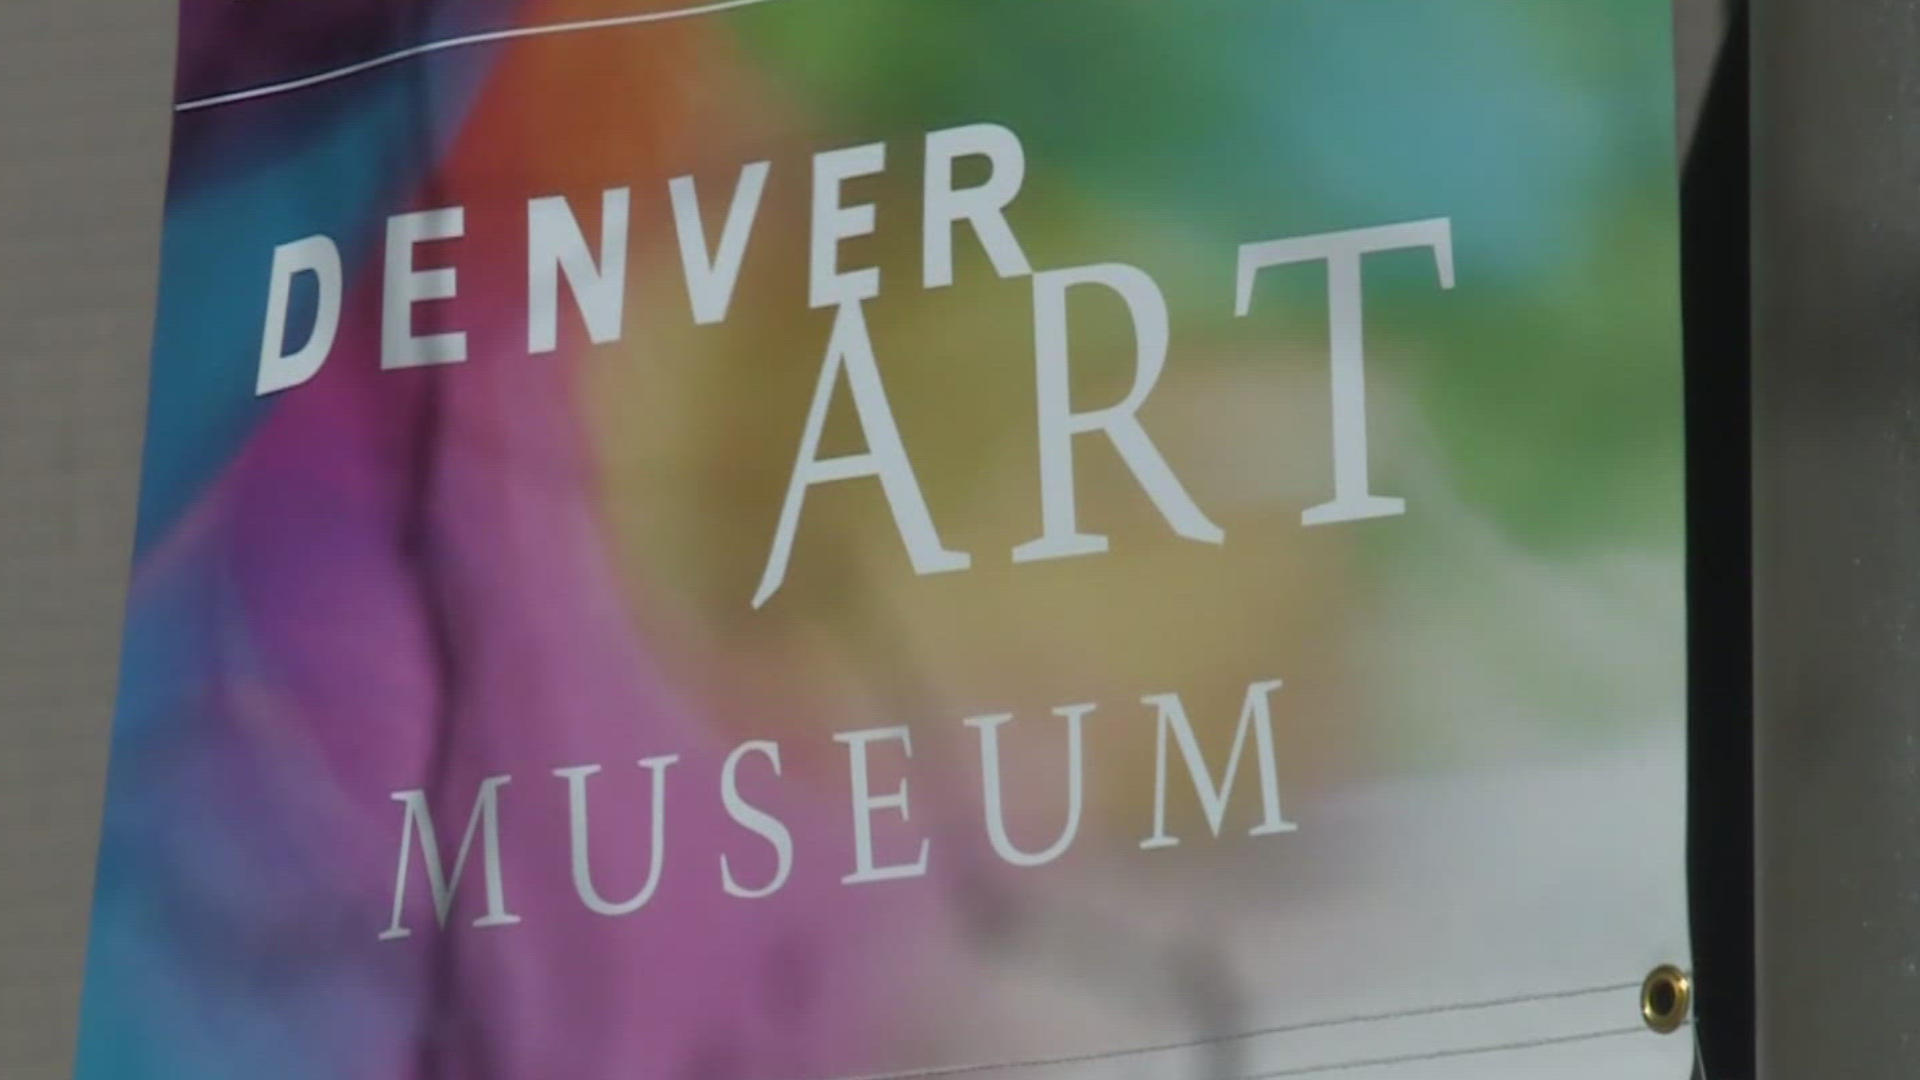 Denver Art Museum is returning pieces connected to gallerists Doris and Nancy Weiner, who were convicted of illegally acquiring art pieces.